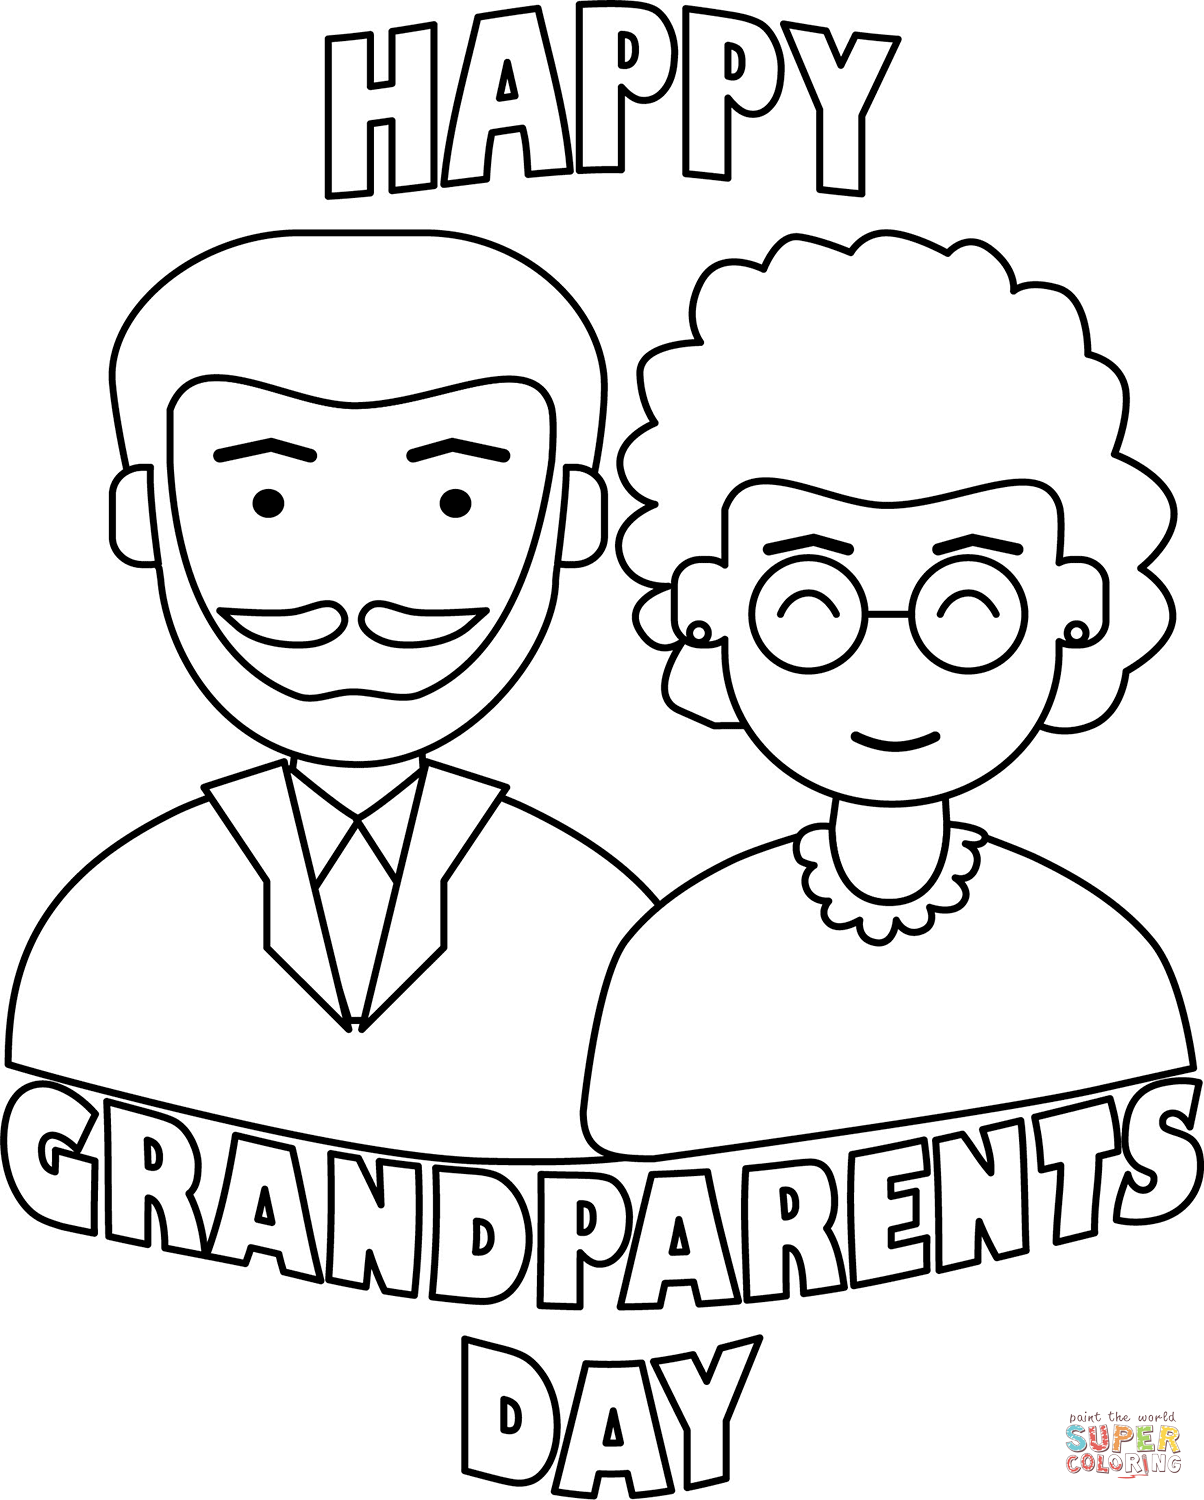 Grandparents day coloring page free printable coloring pages